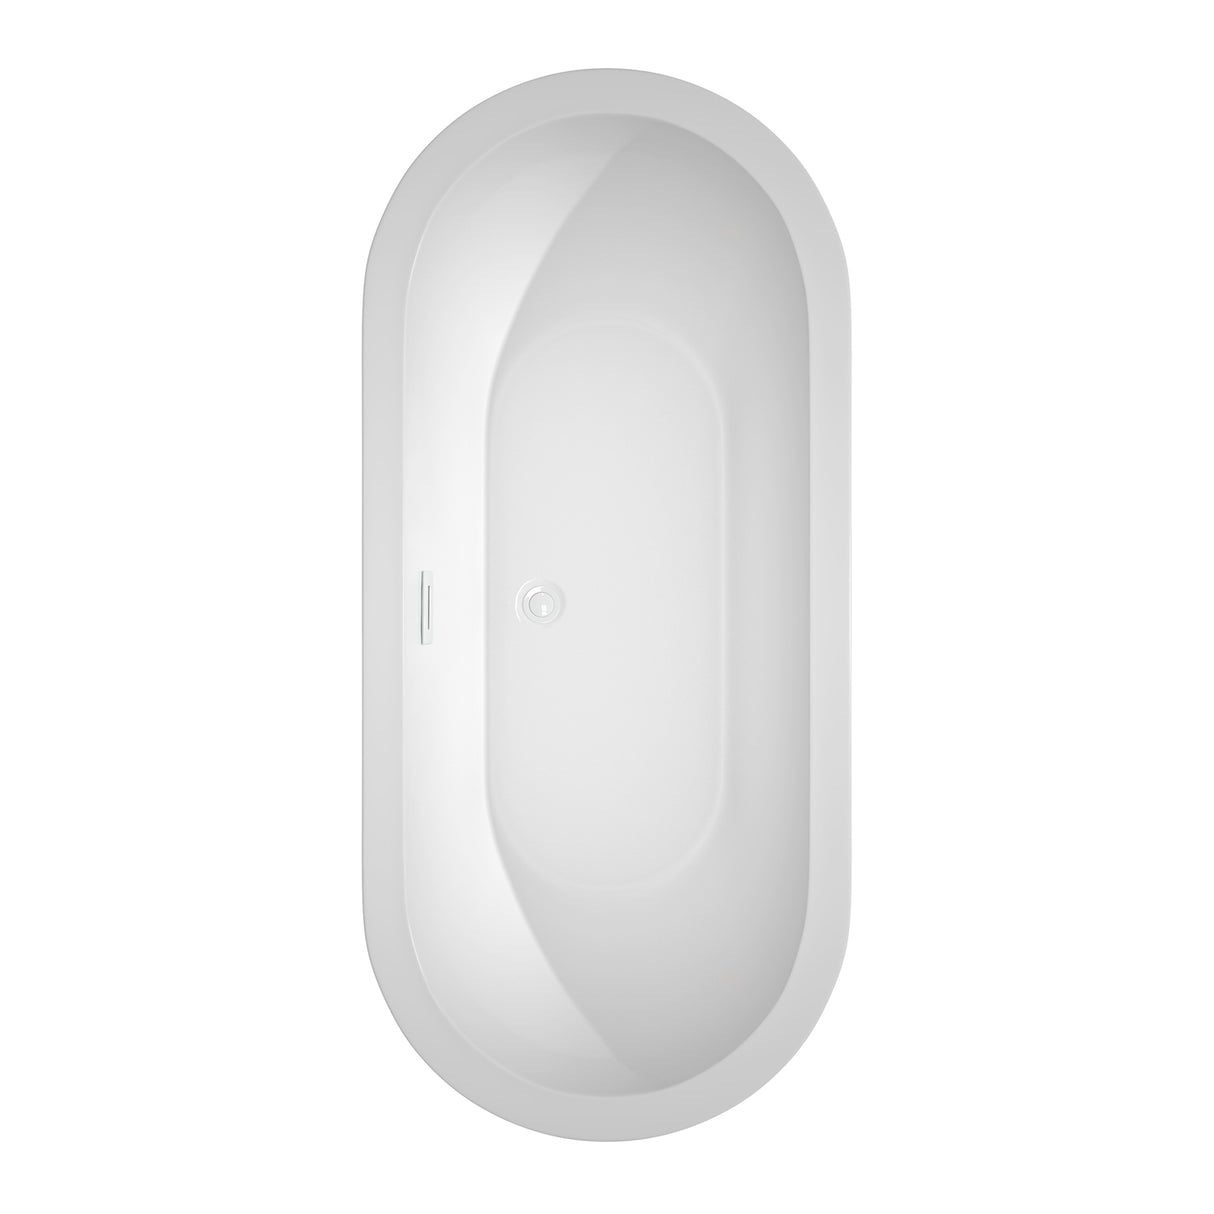 Soho 68 Inch Freestanding Bathtub in White with Shiny White Drain and Overflow Trim